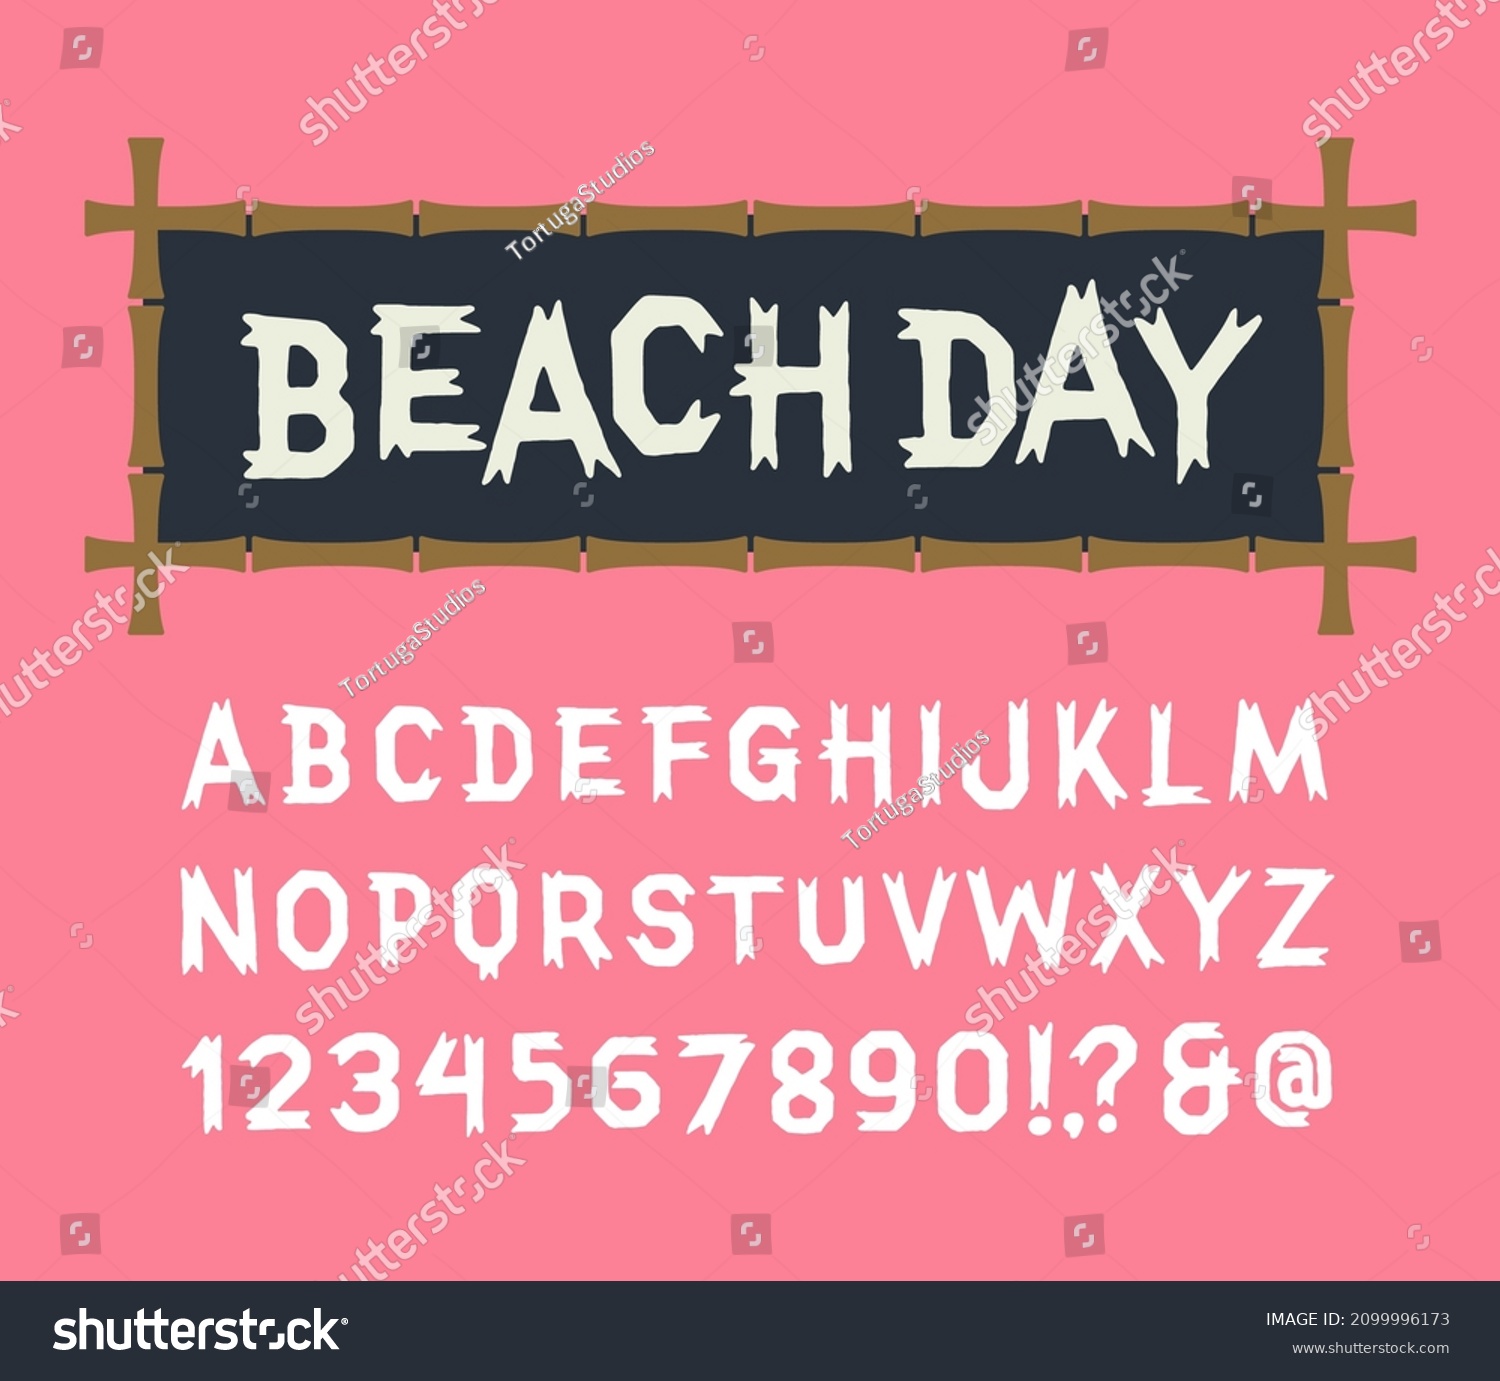 SVG of Beach day playful summer alphabet. Beach shack party festive typeface. Funny cartoon cheerful illustrative font. Hand drawn wooden bamboo texture lettering svg